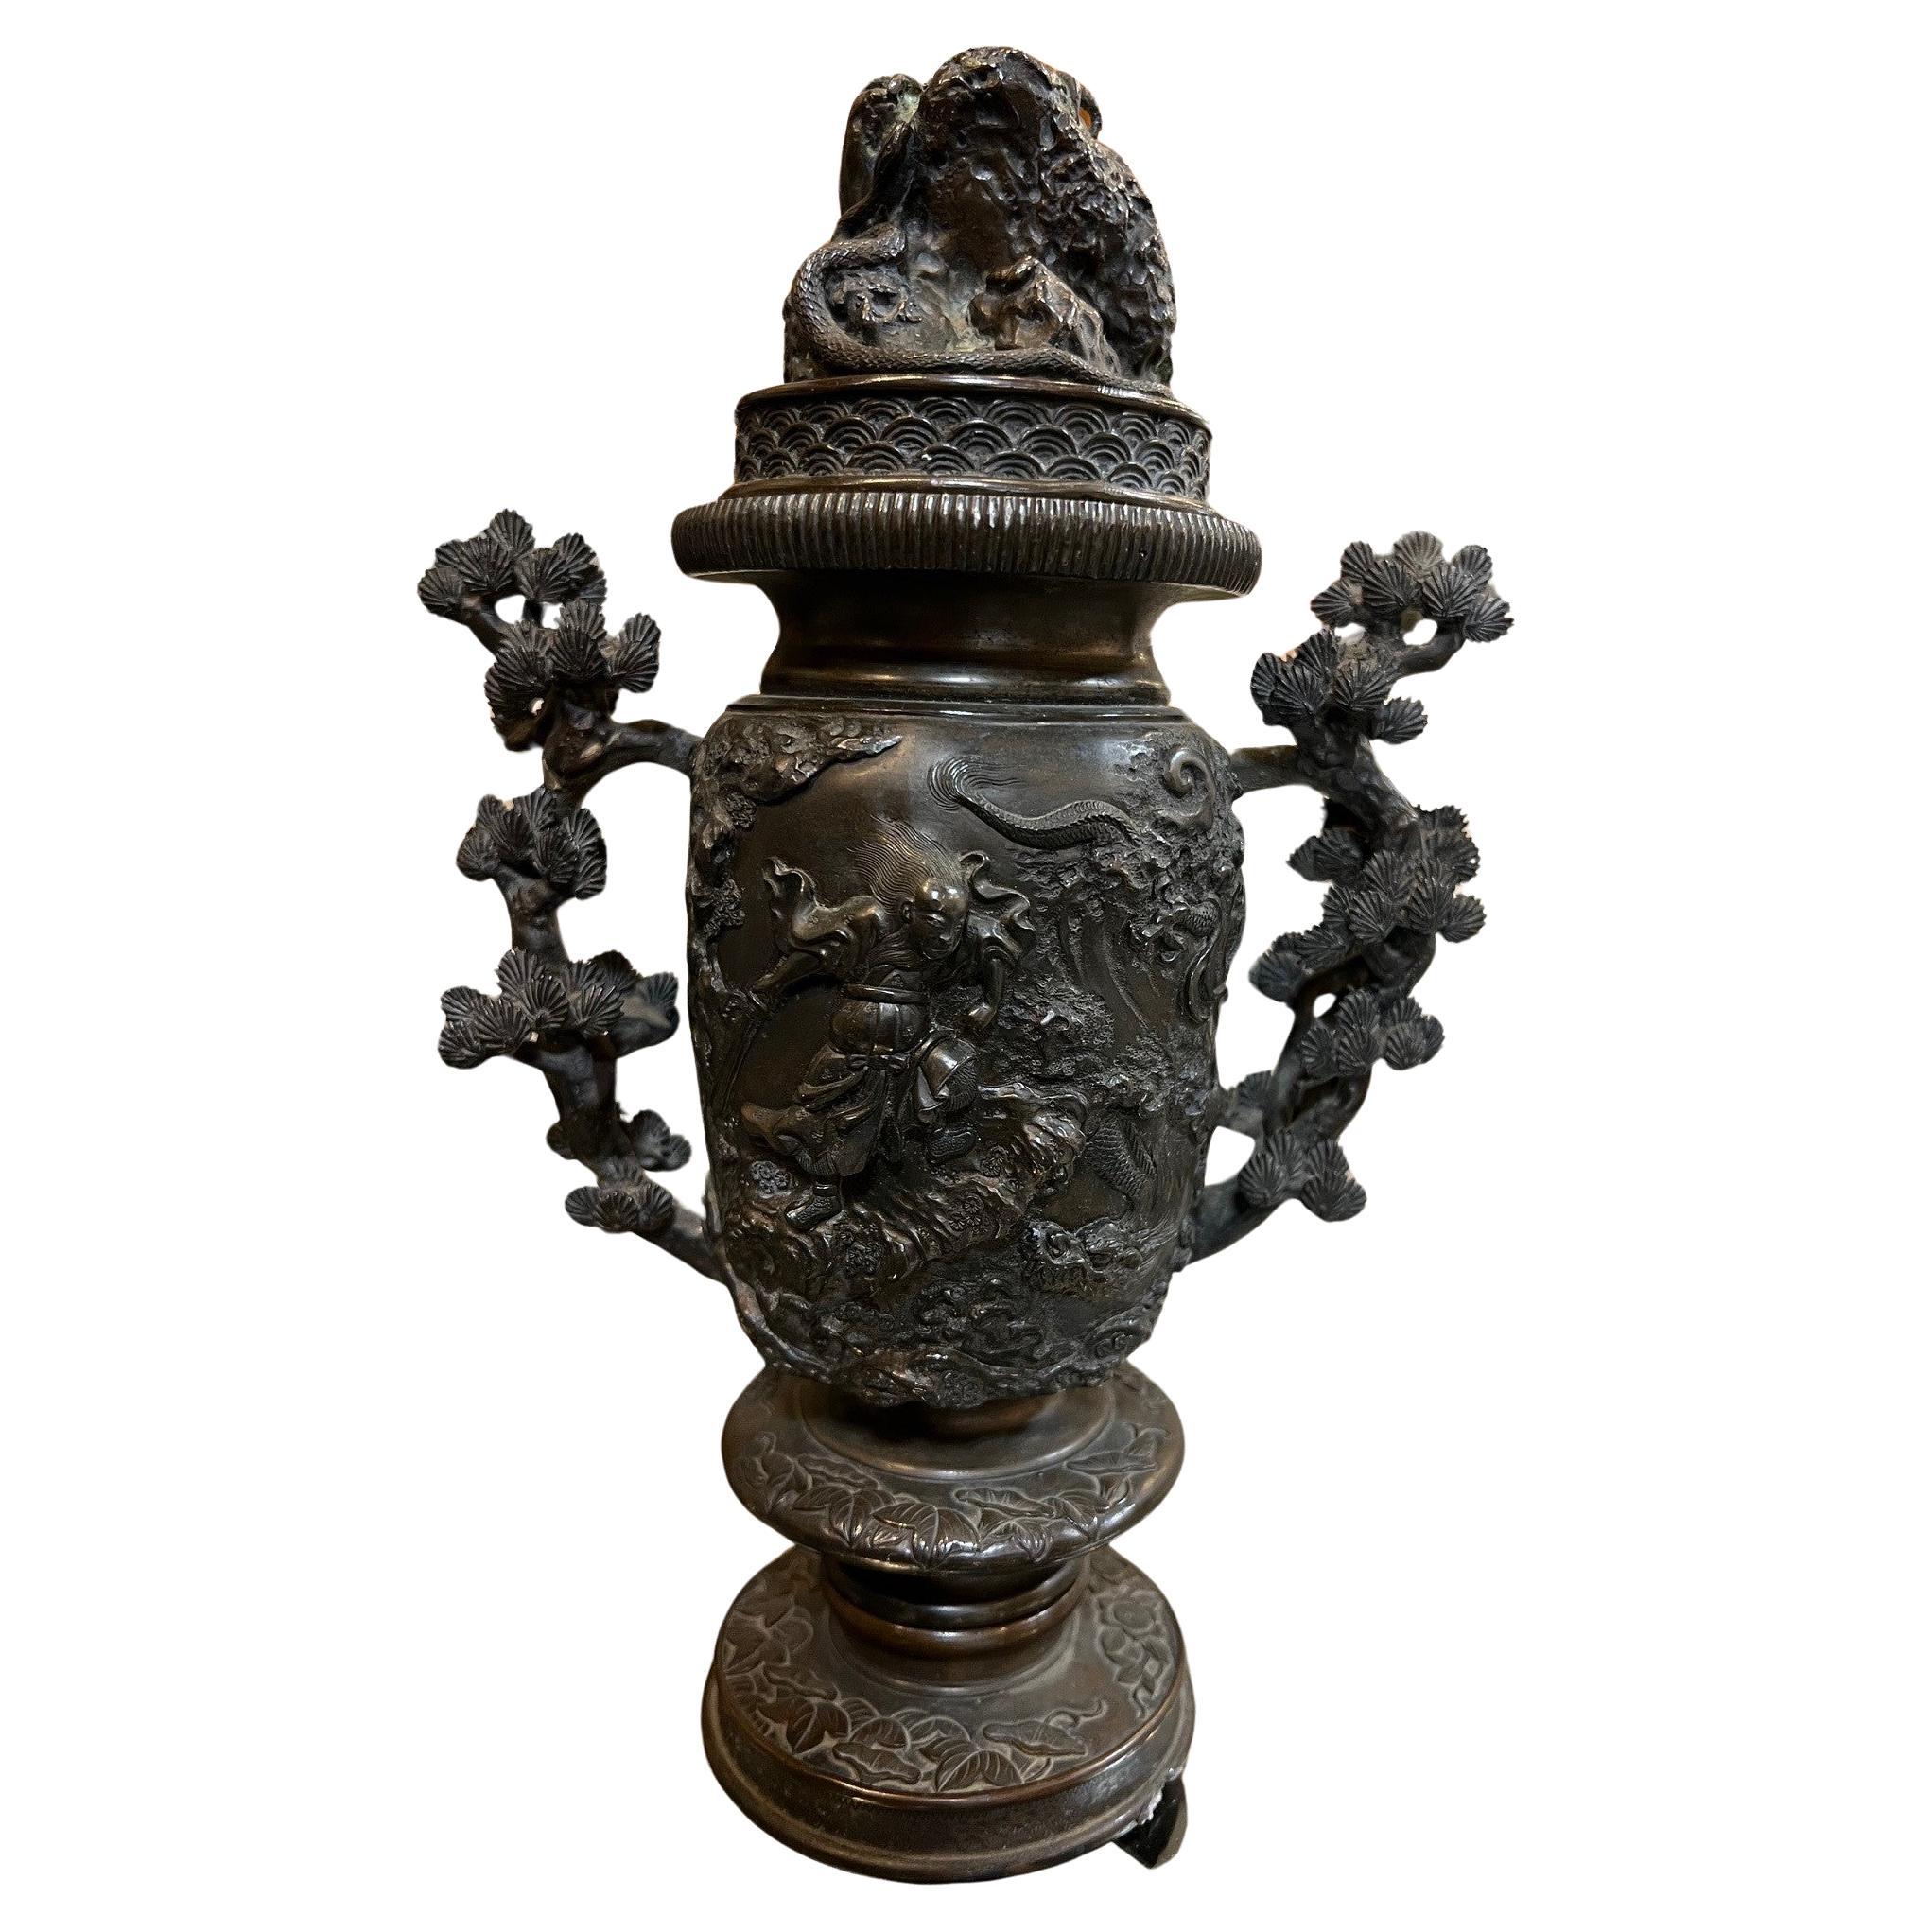 A bronze censer or also known as a incense burner from the 19th century. This incense burner has great detailing with handles in the shape of bonsai trees. The center section has a eagle flying over snakes on one side and a warrior holding a sword